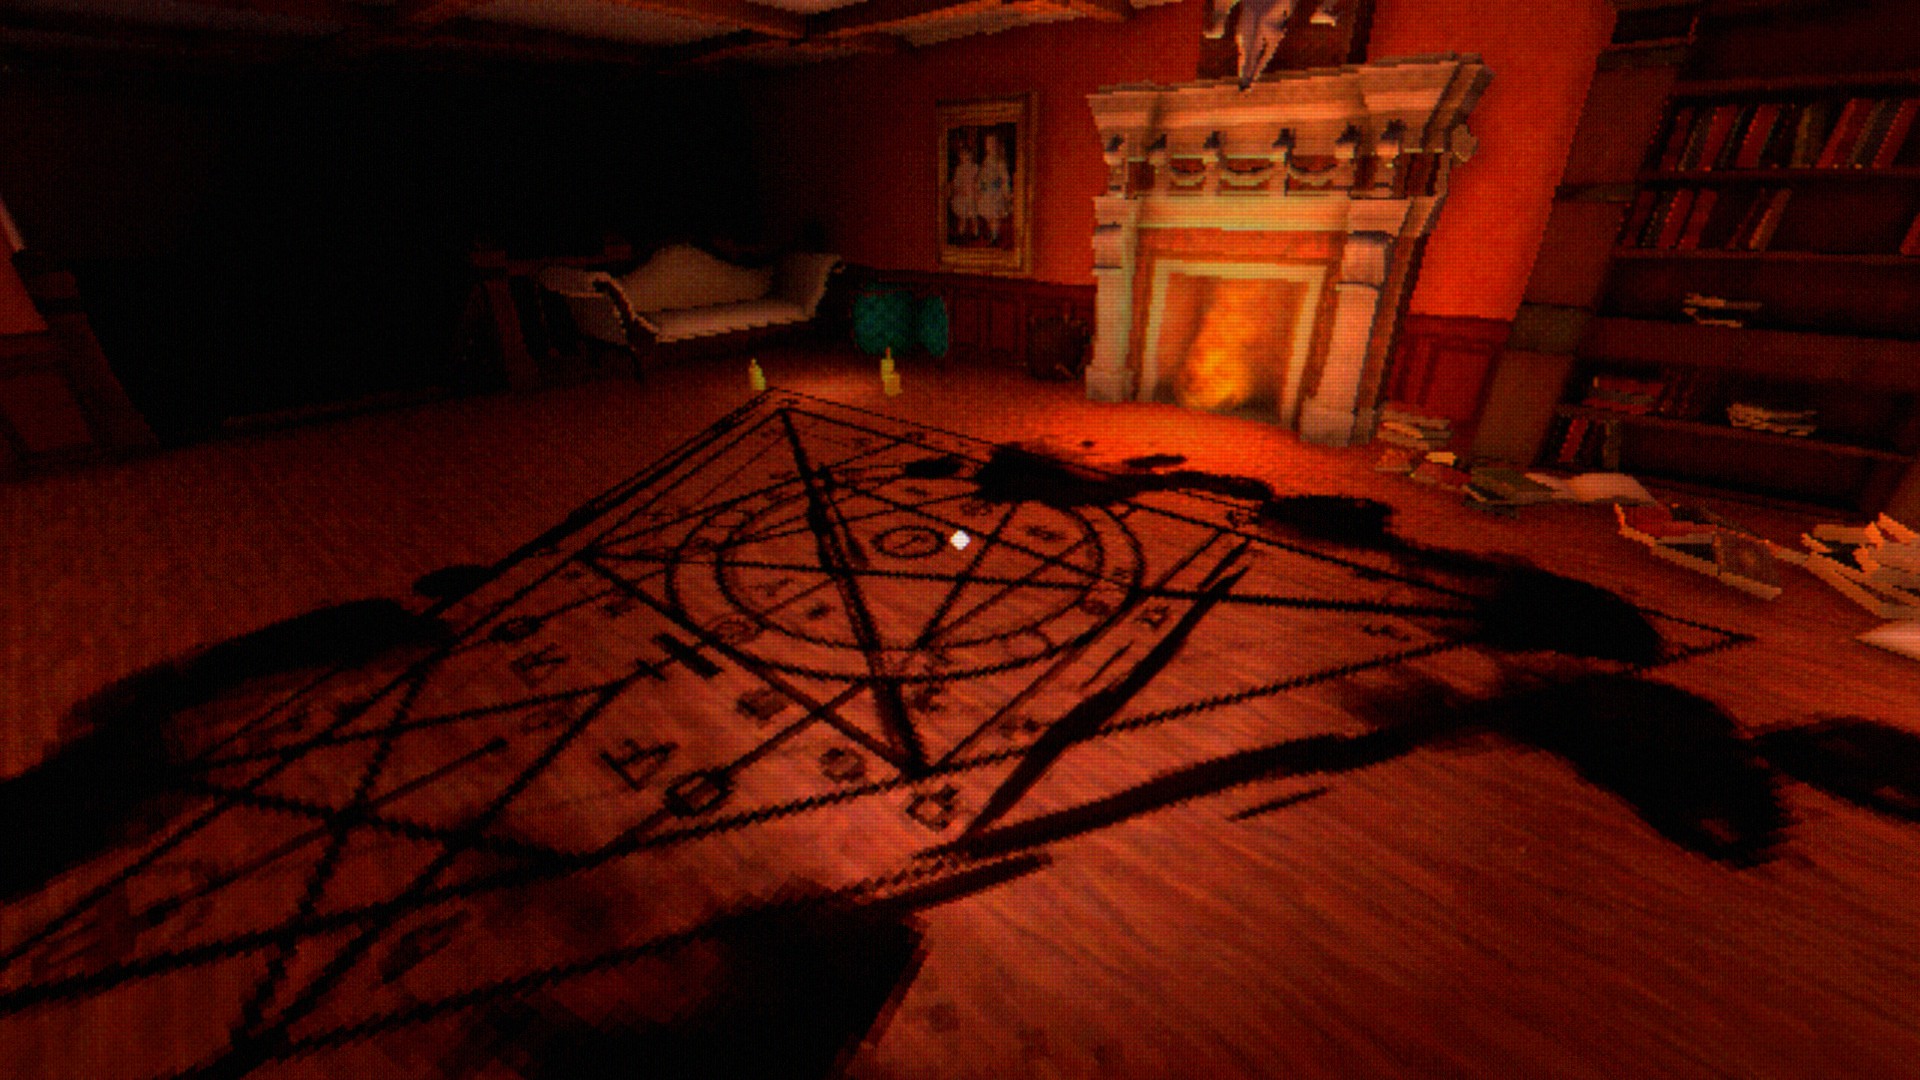 In a mansion's foyer, the player inspects a creepy runic design that's been drawn on the floor in what appears to be blood.